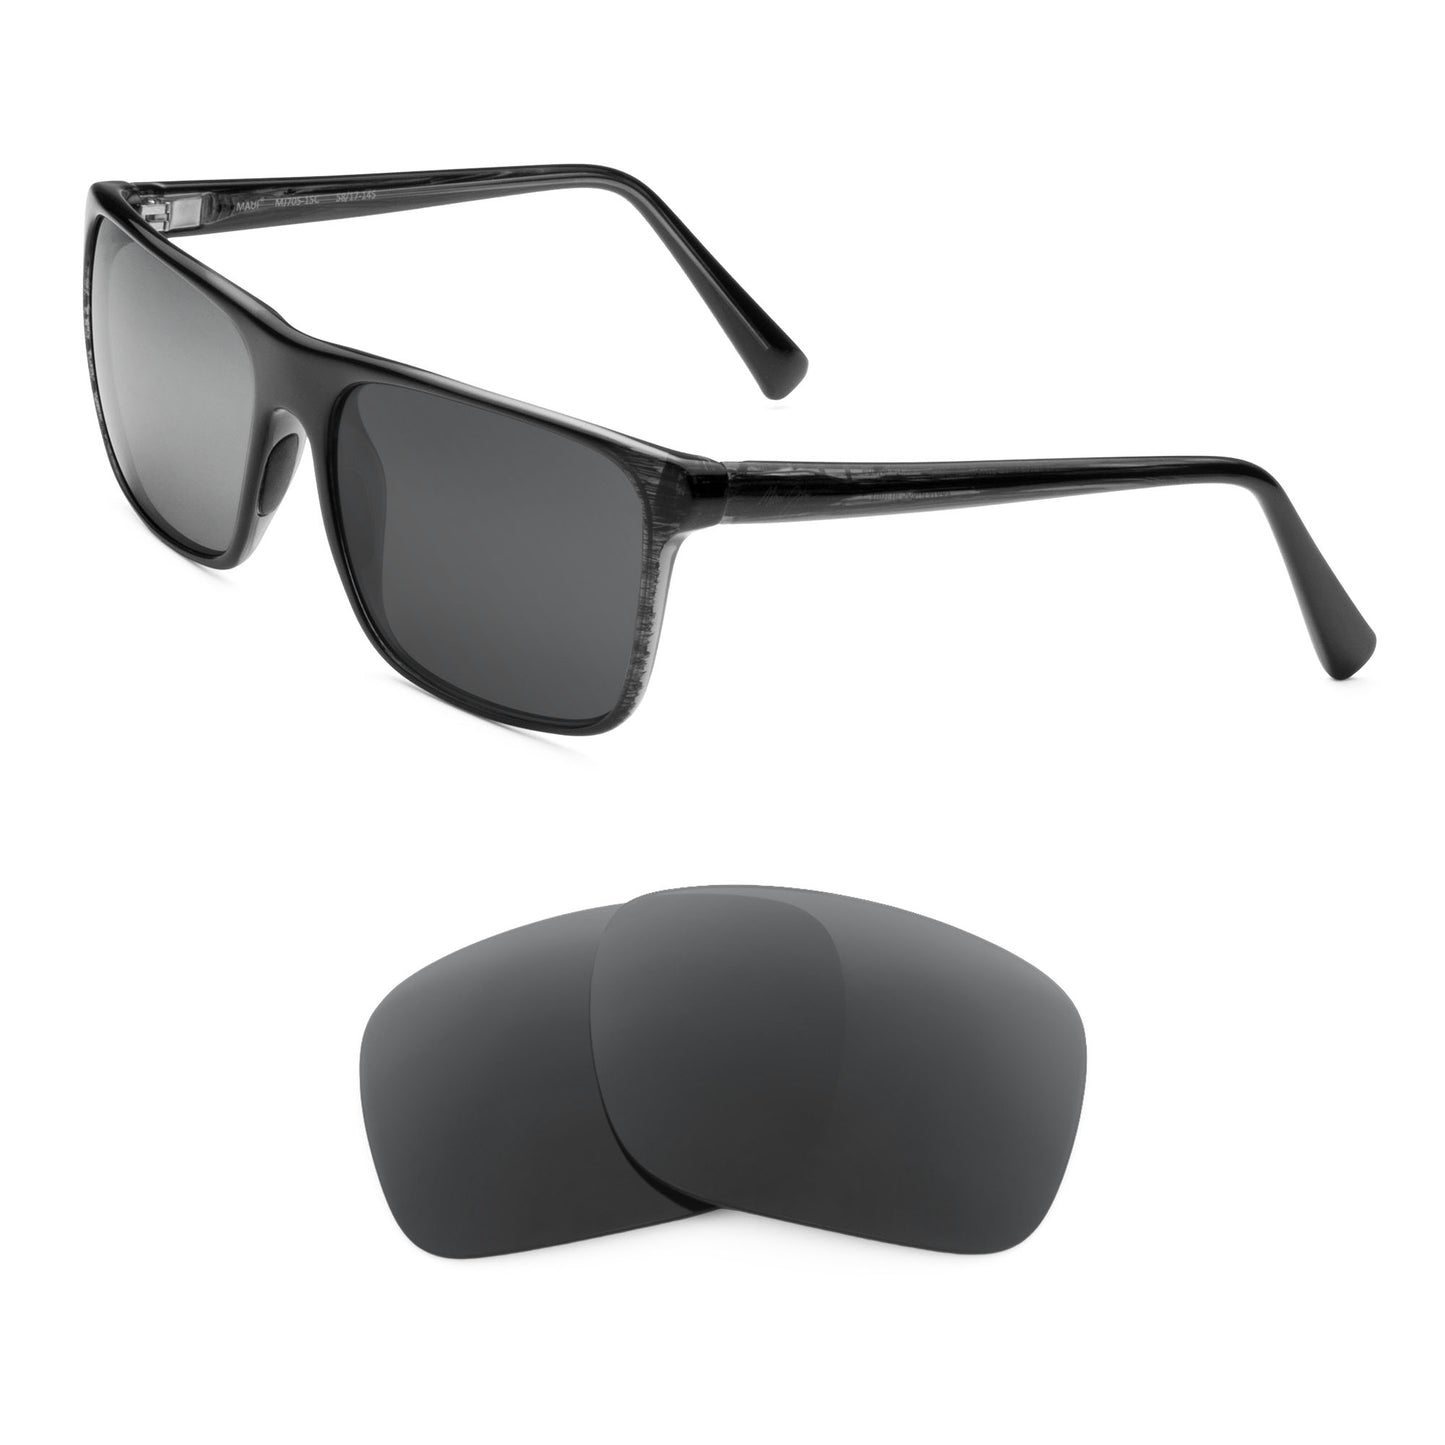 Maui Jim Flat Island MJ705 sunglasses with replacement lenses